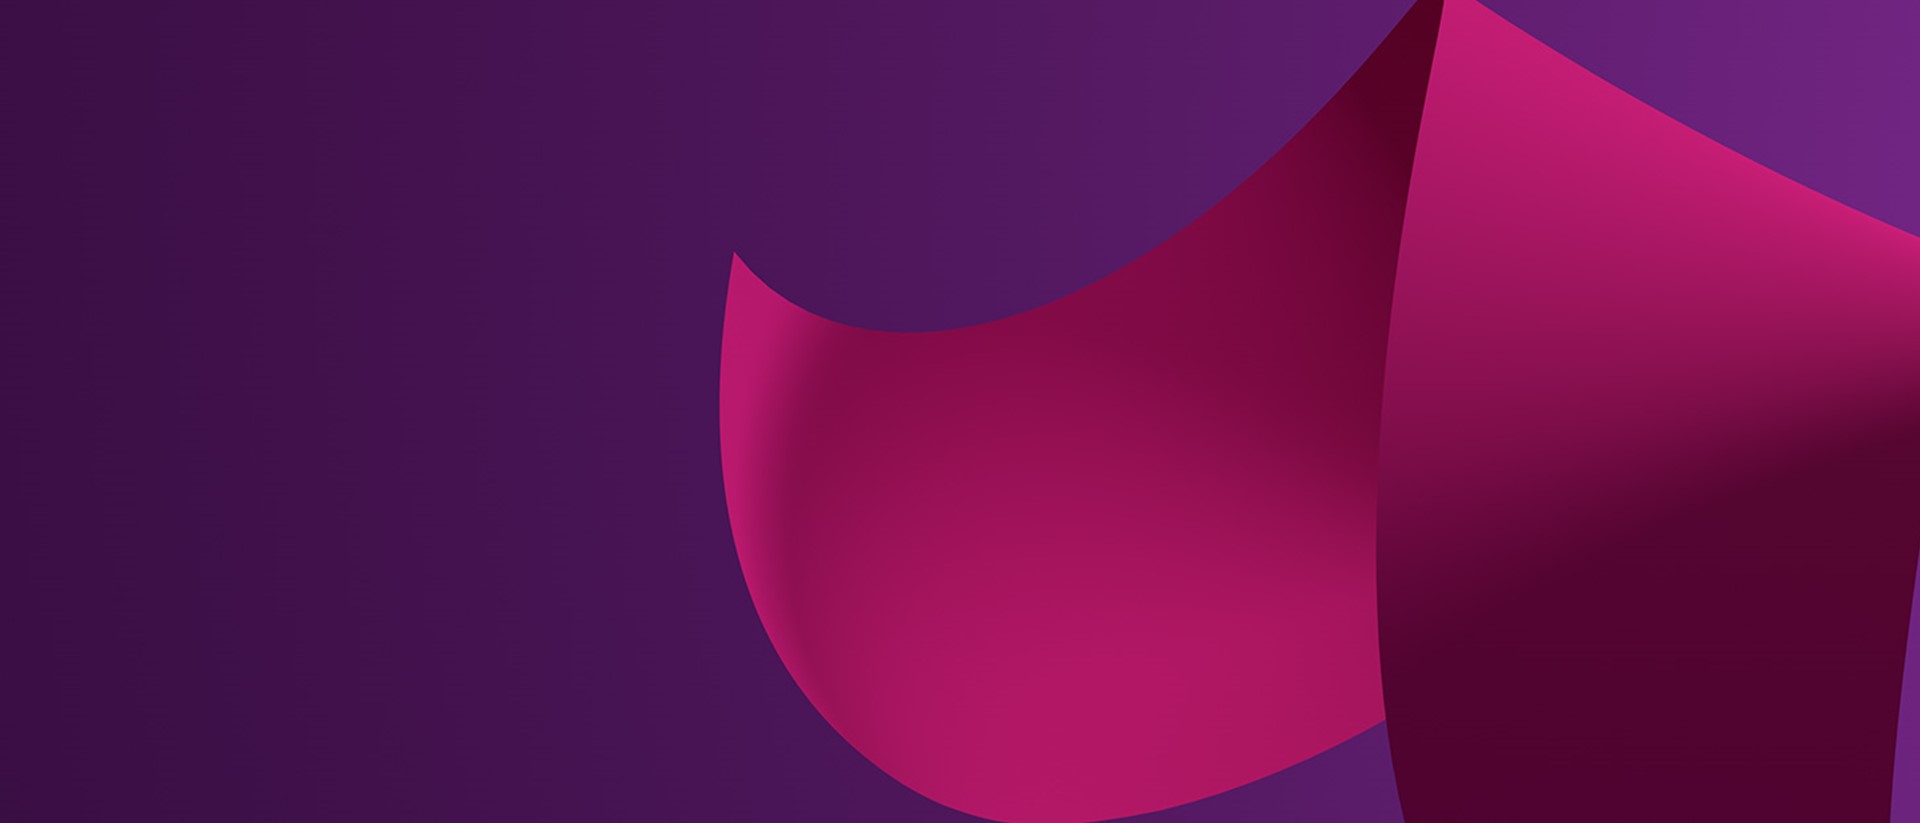 Hero image of one of 7IM's brand shapes in purple and pink